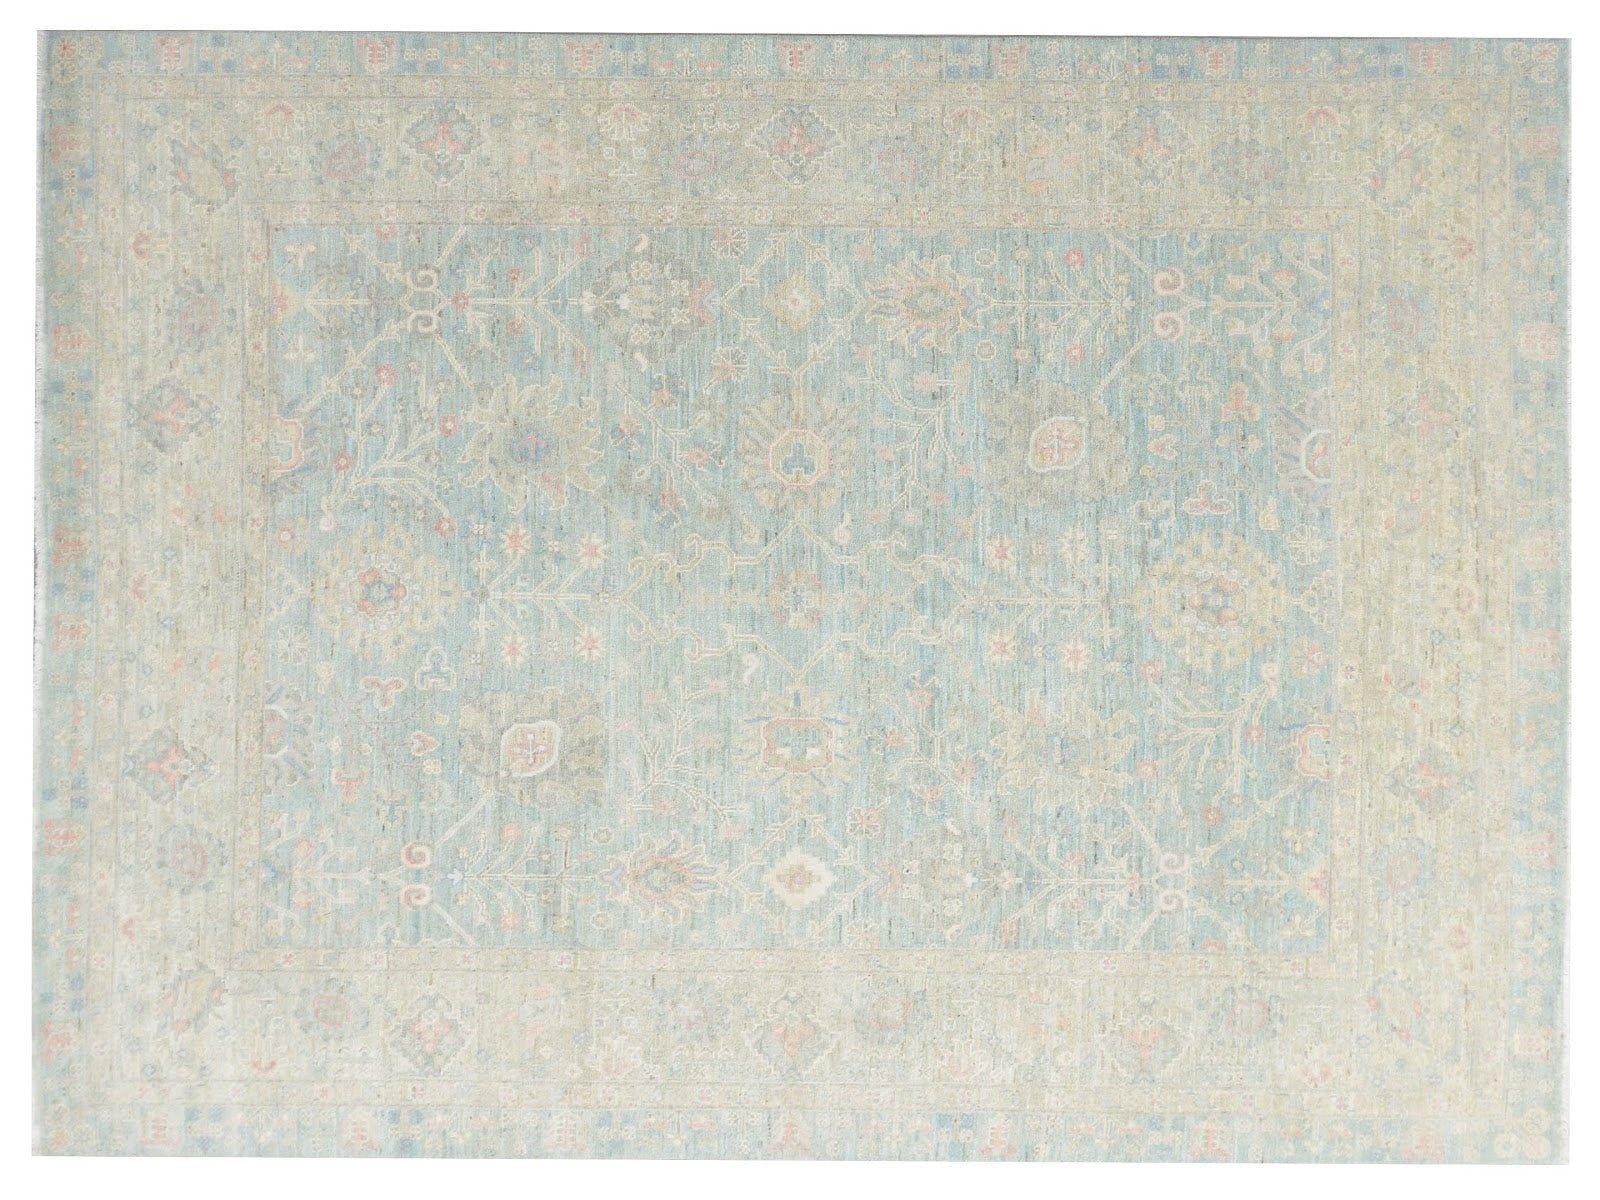 8x10 hand-knotted Ziegler rug with soft neutral colors and floral motifs